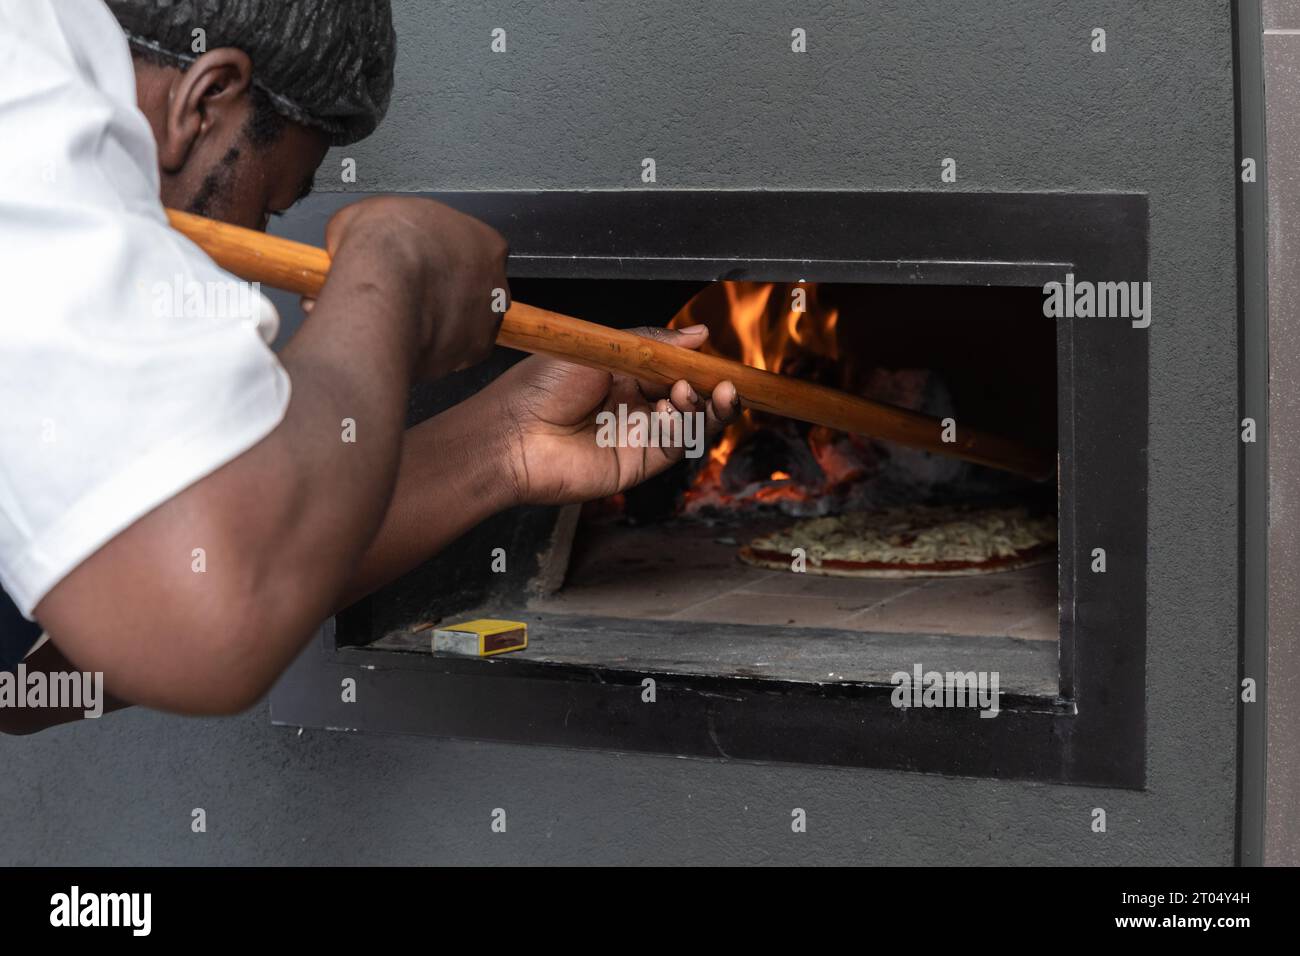 In the intense glow of the pizza oven's flames, a skilled black man, using a wooden peel, expertly maneuvers a sizzling pizza Stock Photo